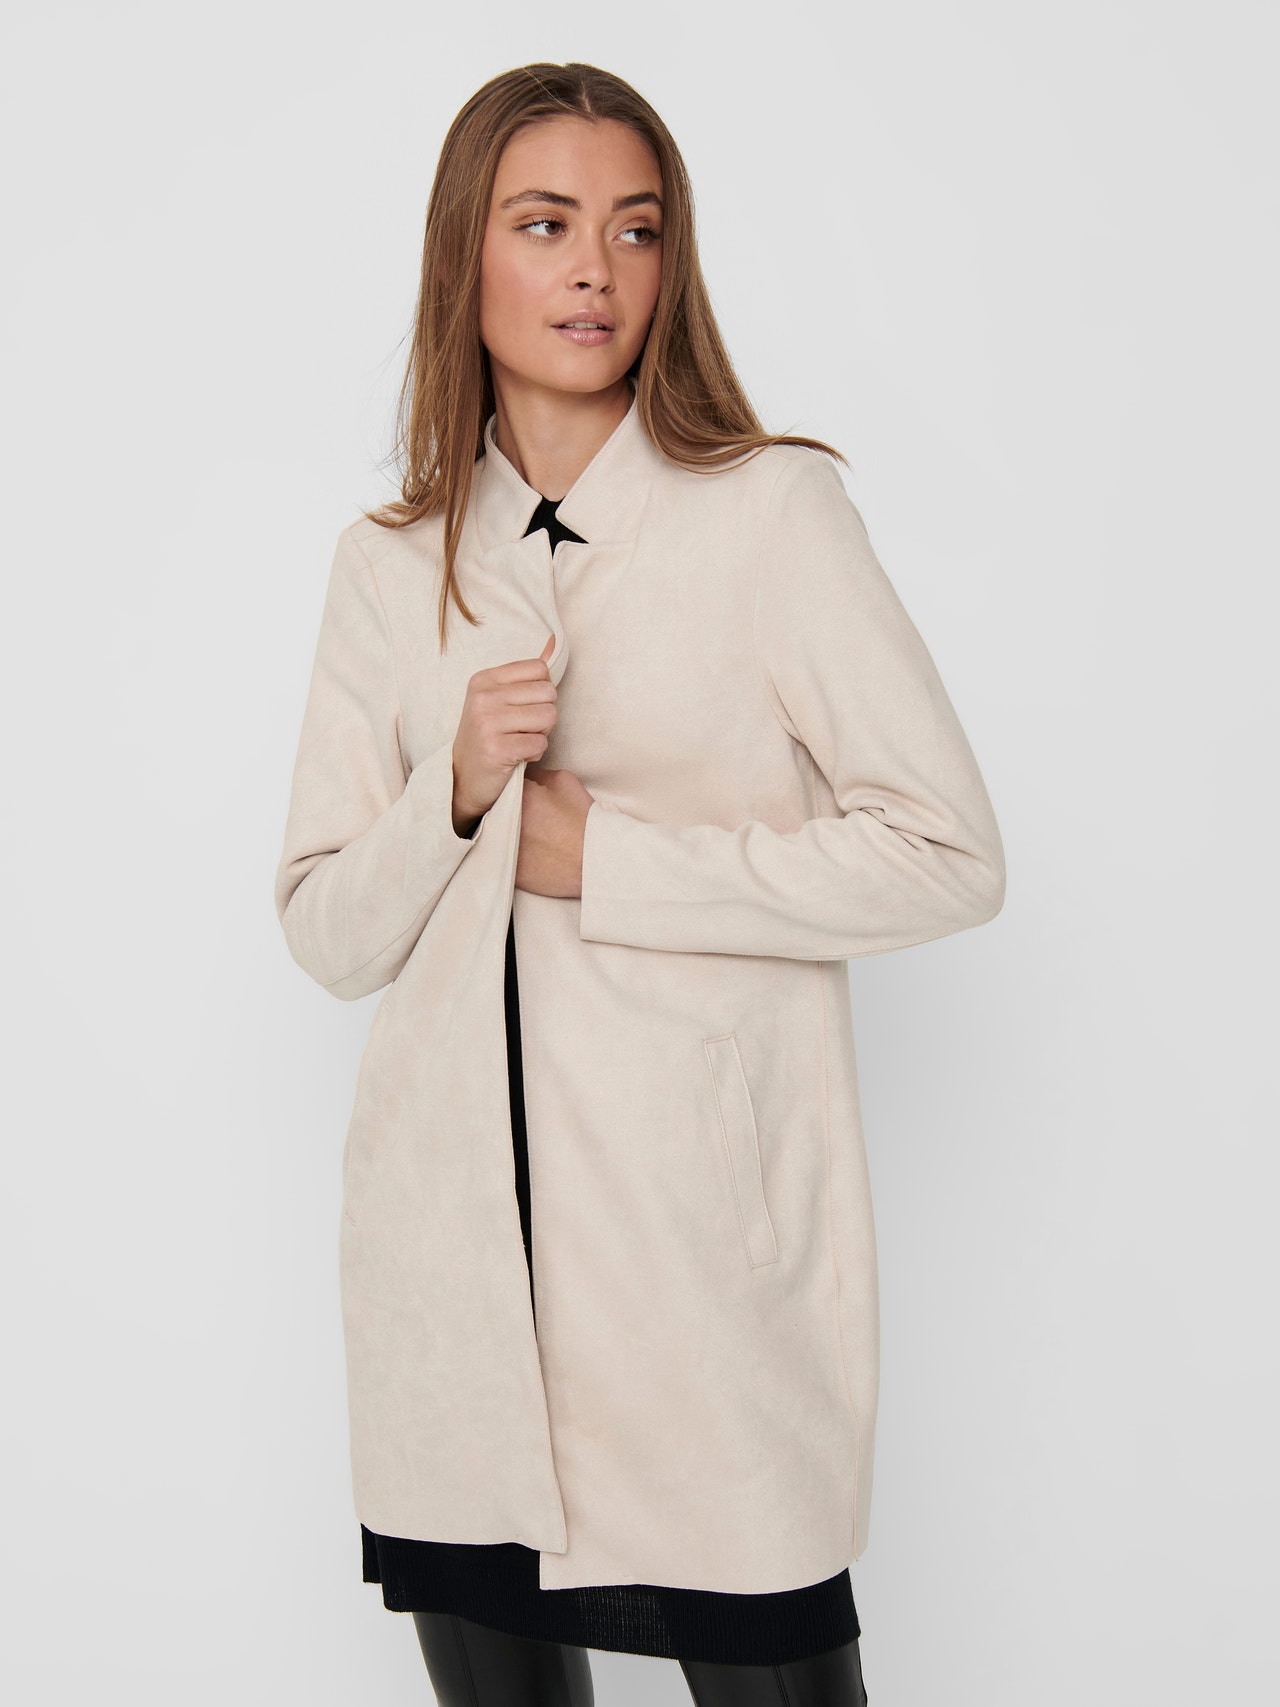 ONLY Spread collar Coat -Pumice Stone - 15218563